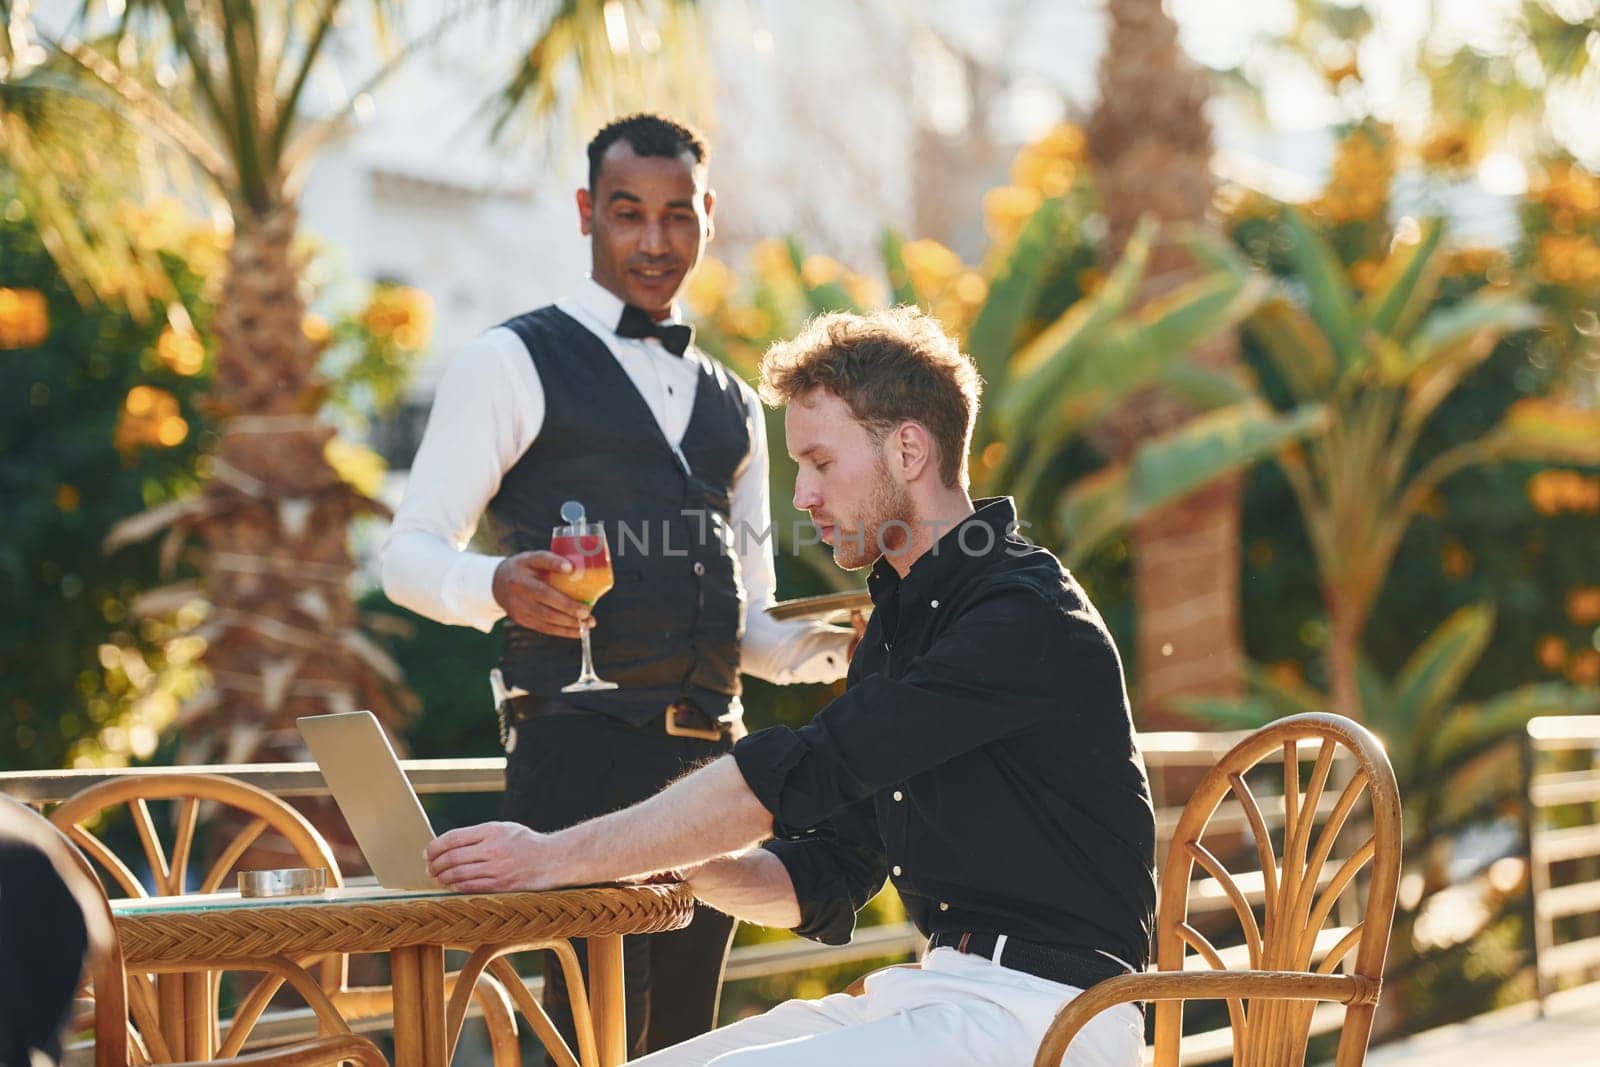 Serviced by waiter. Young man is outdoors at sunny daytime. Concept of vacation.